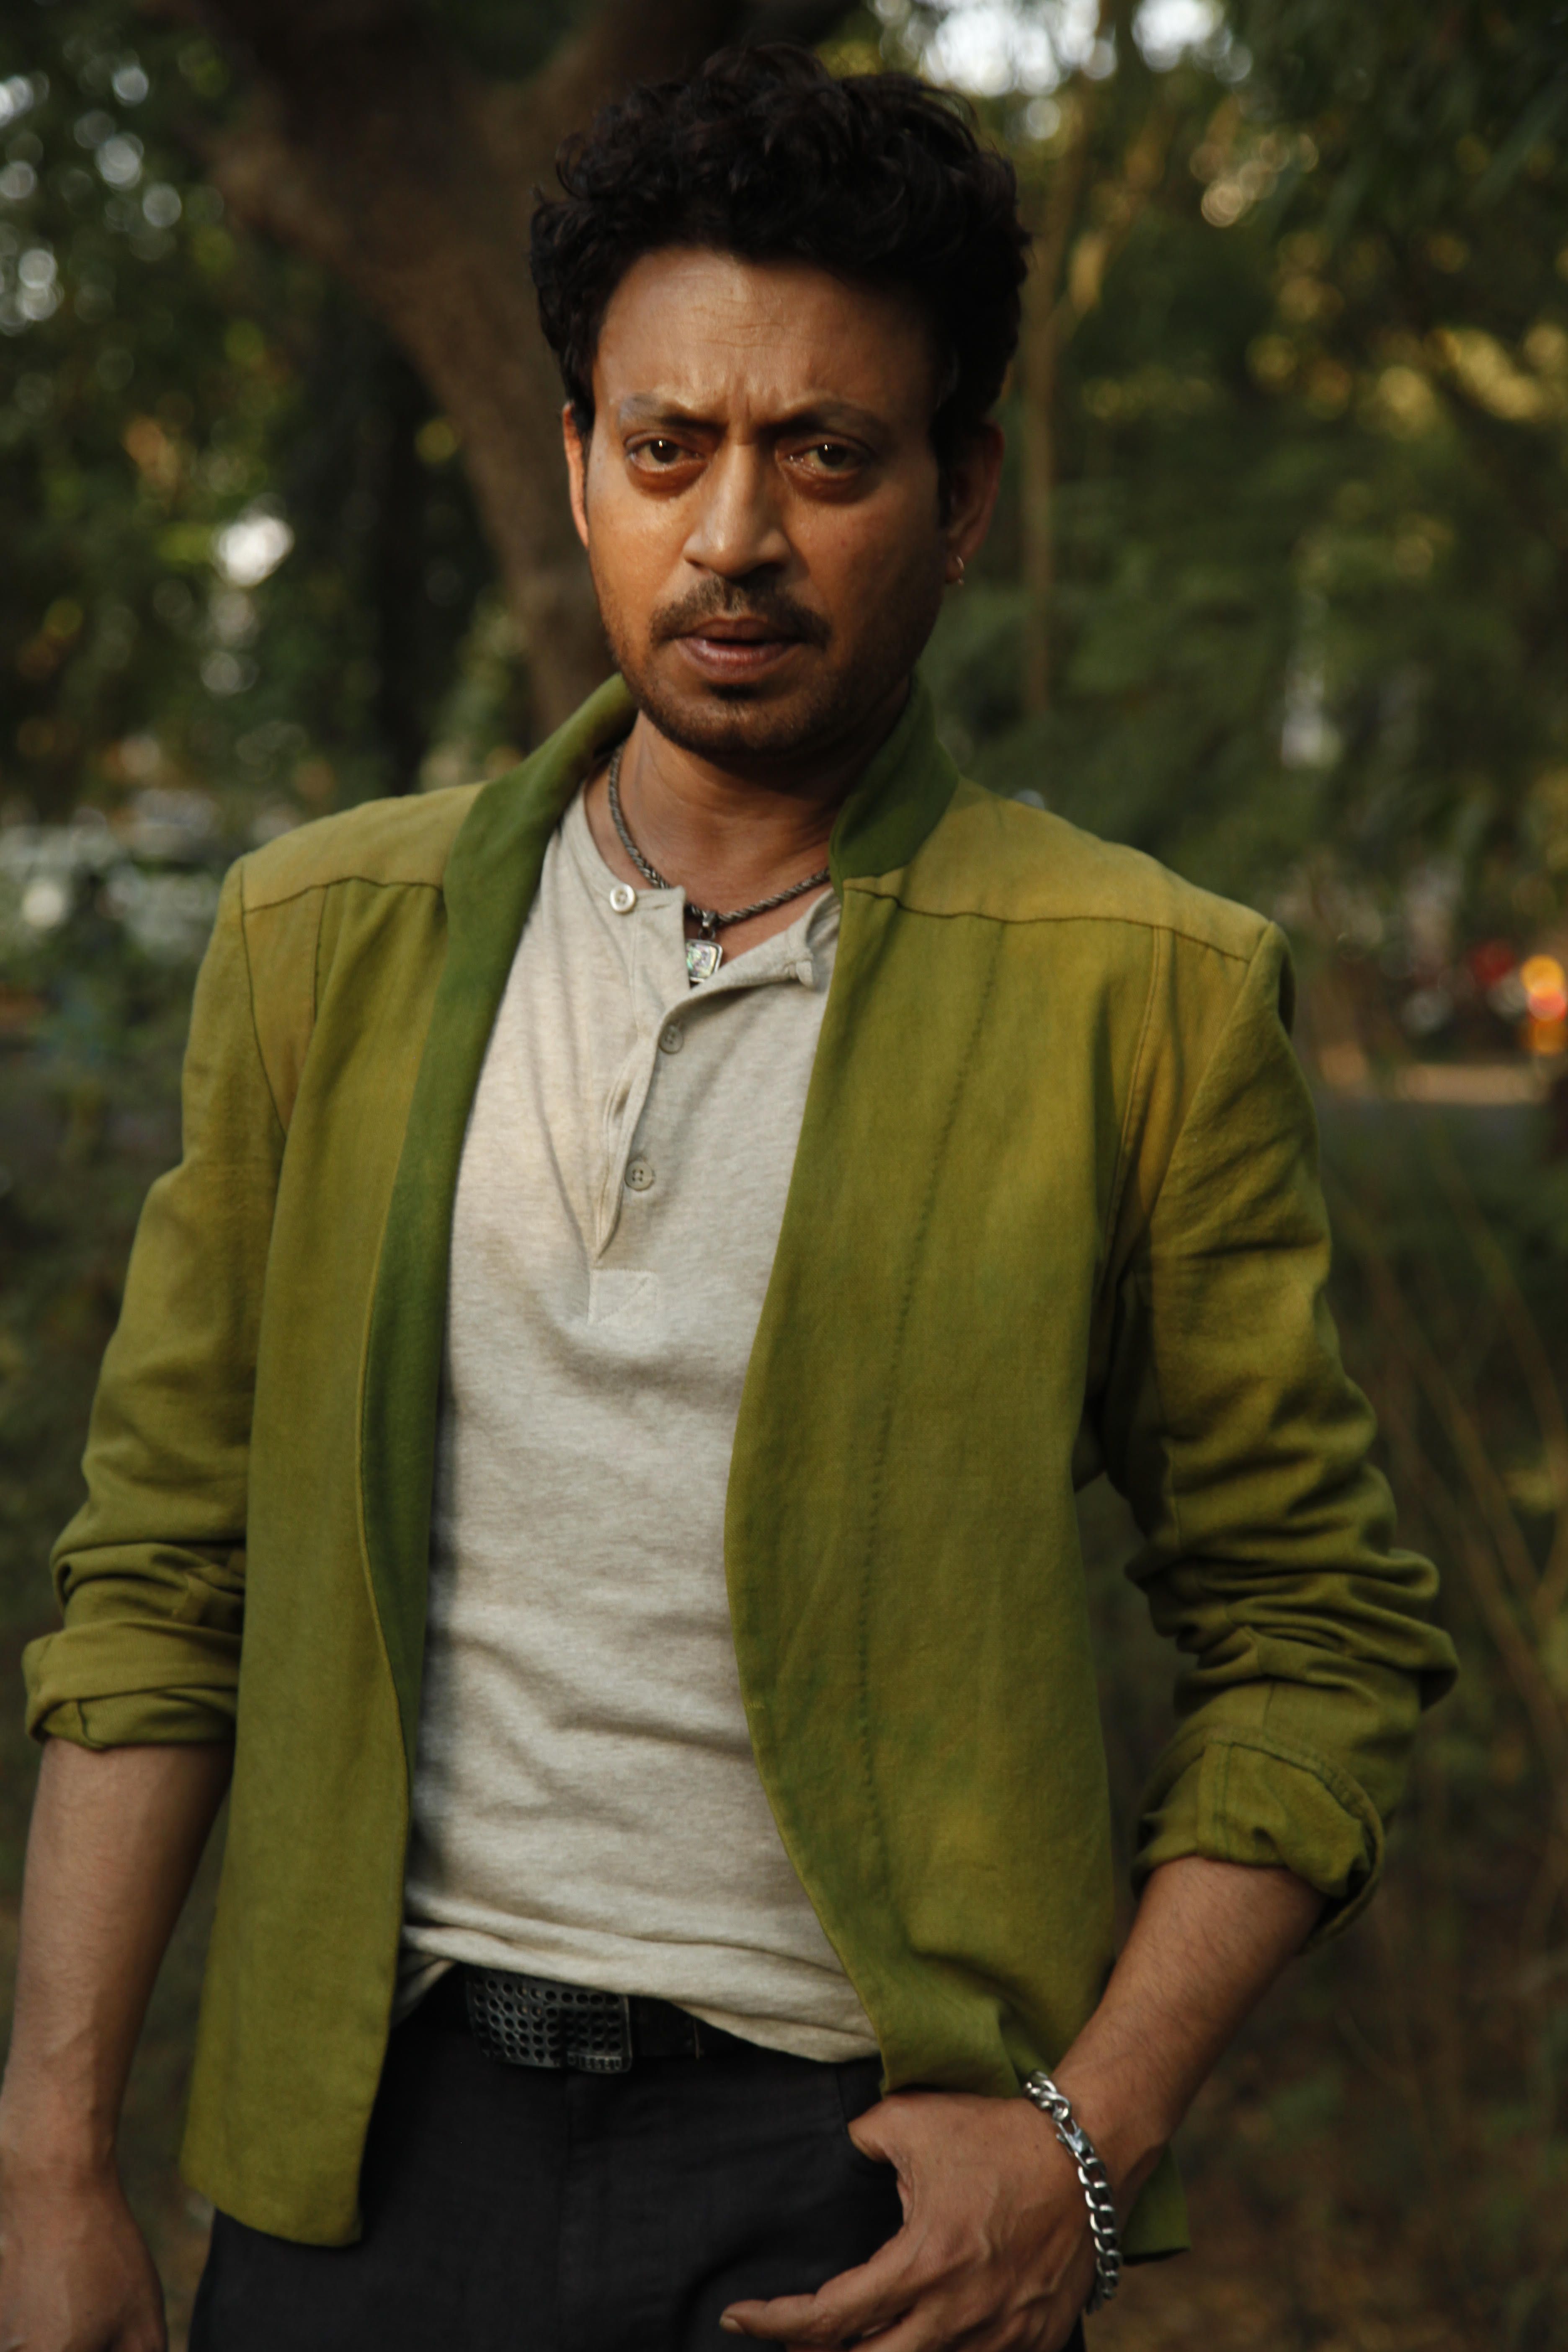 Irrfan Khan on playing the waiting game and the trials